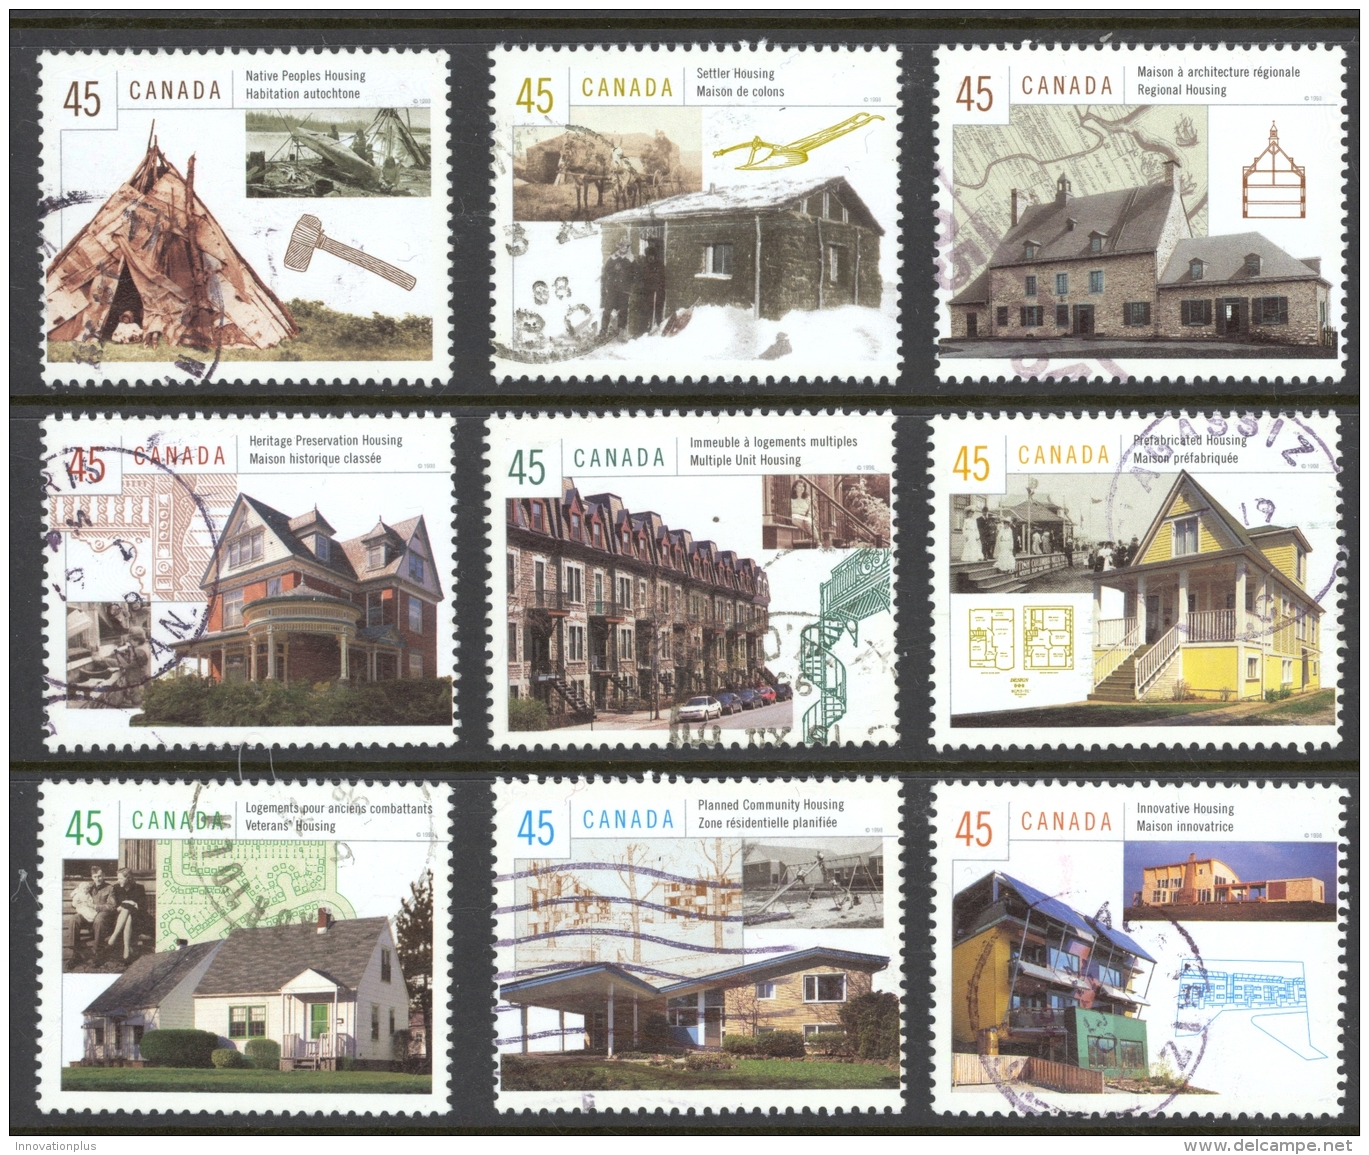 Canada Sc# 1755a-1755i Used Set/9 (b) 1998 45c Housing In Canada - Used Stamps